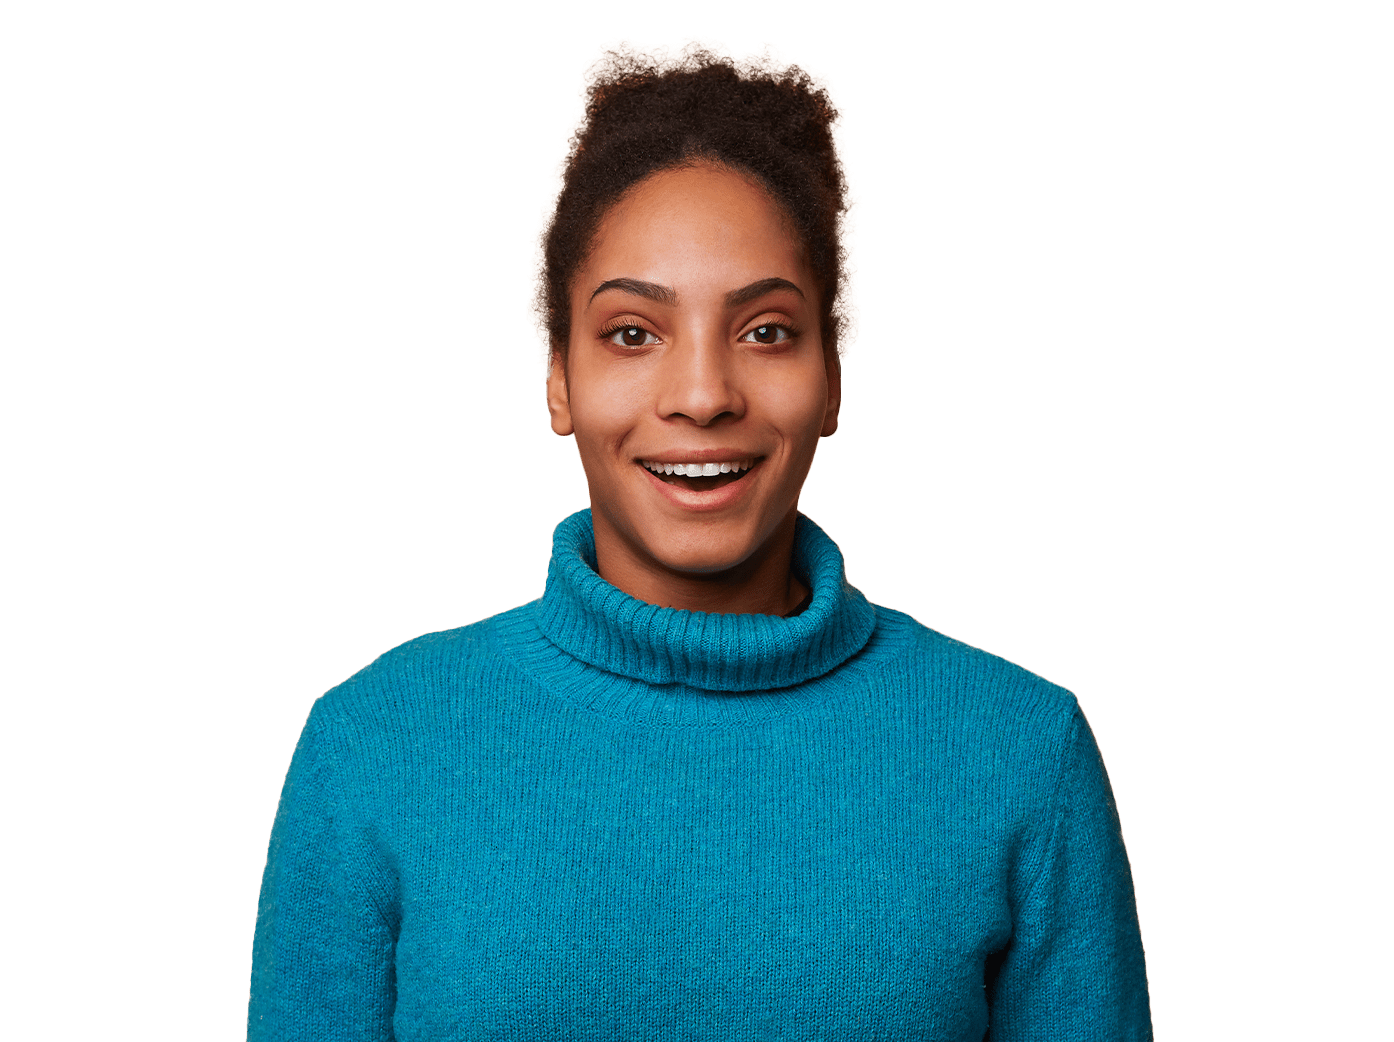 Woman in blue sweater smiling